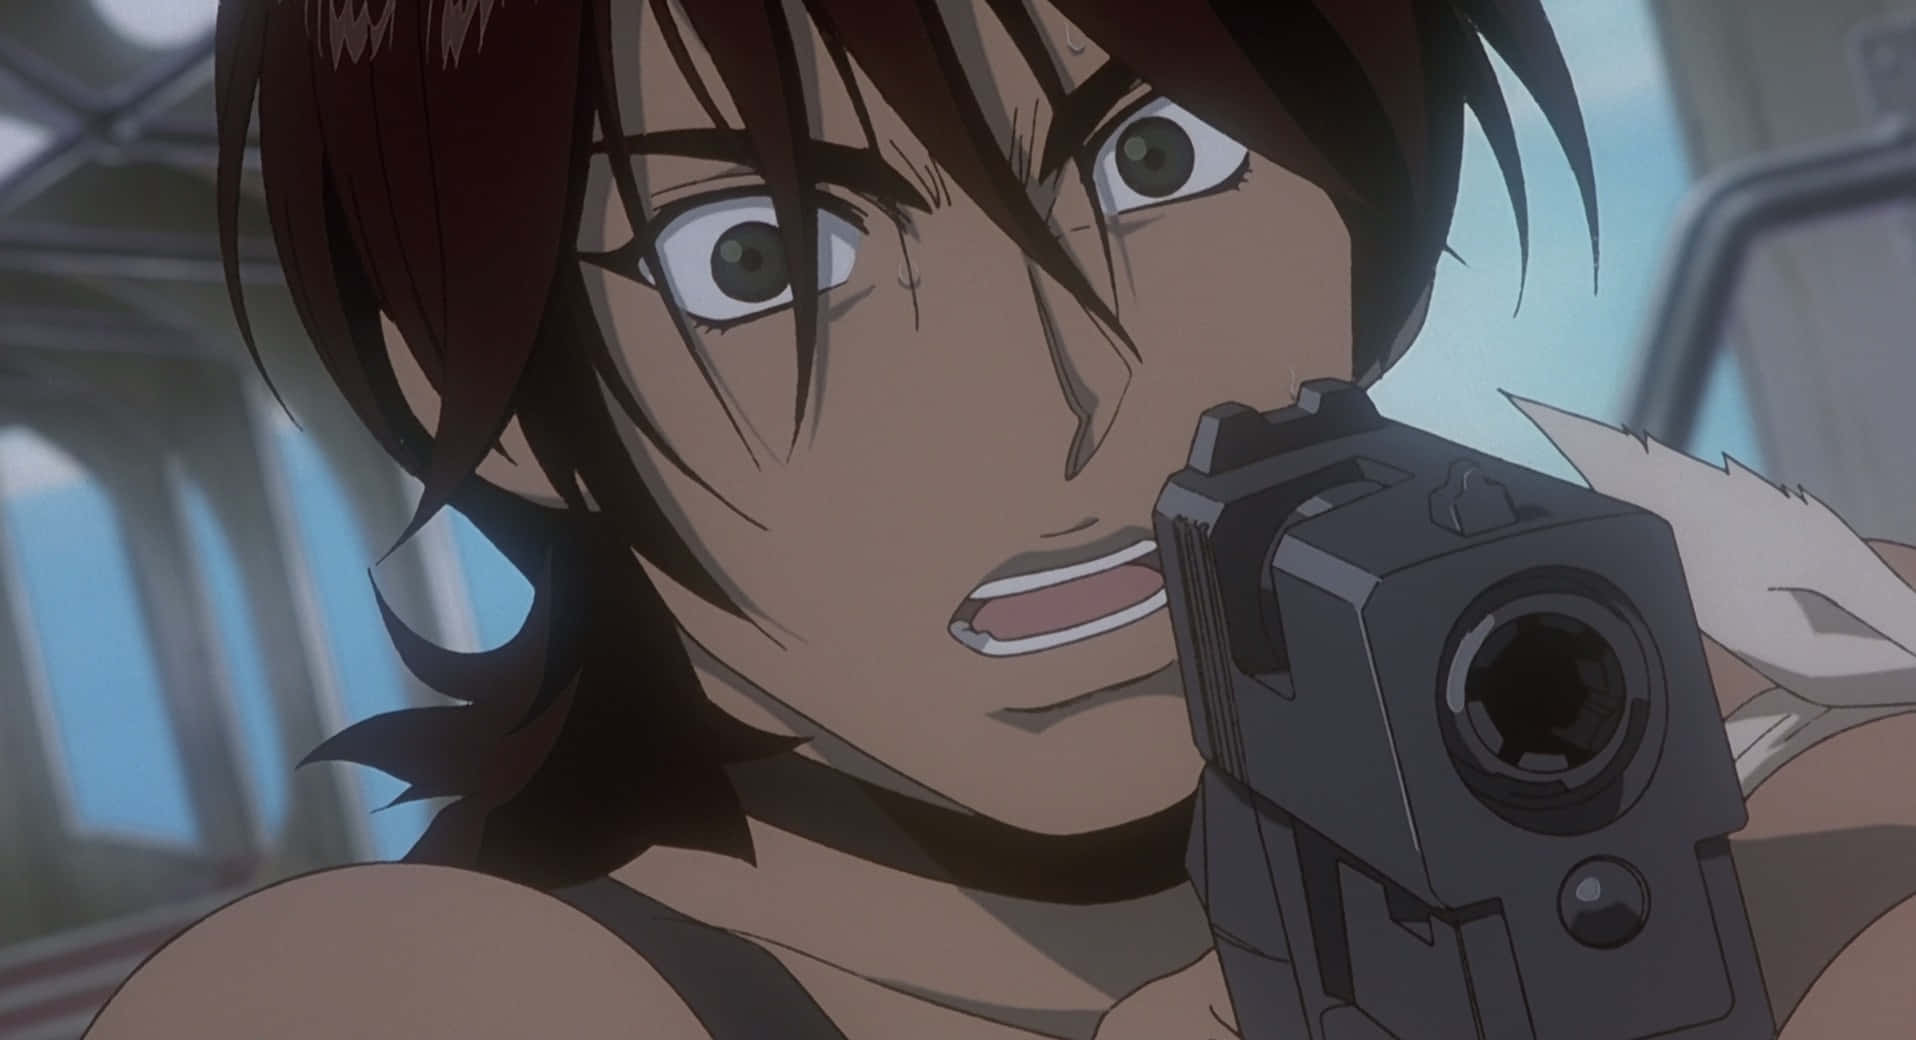 Electra Ovilo from Cowboy Bebop in an intense action scene. Wallpaper